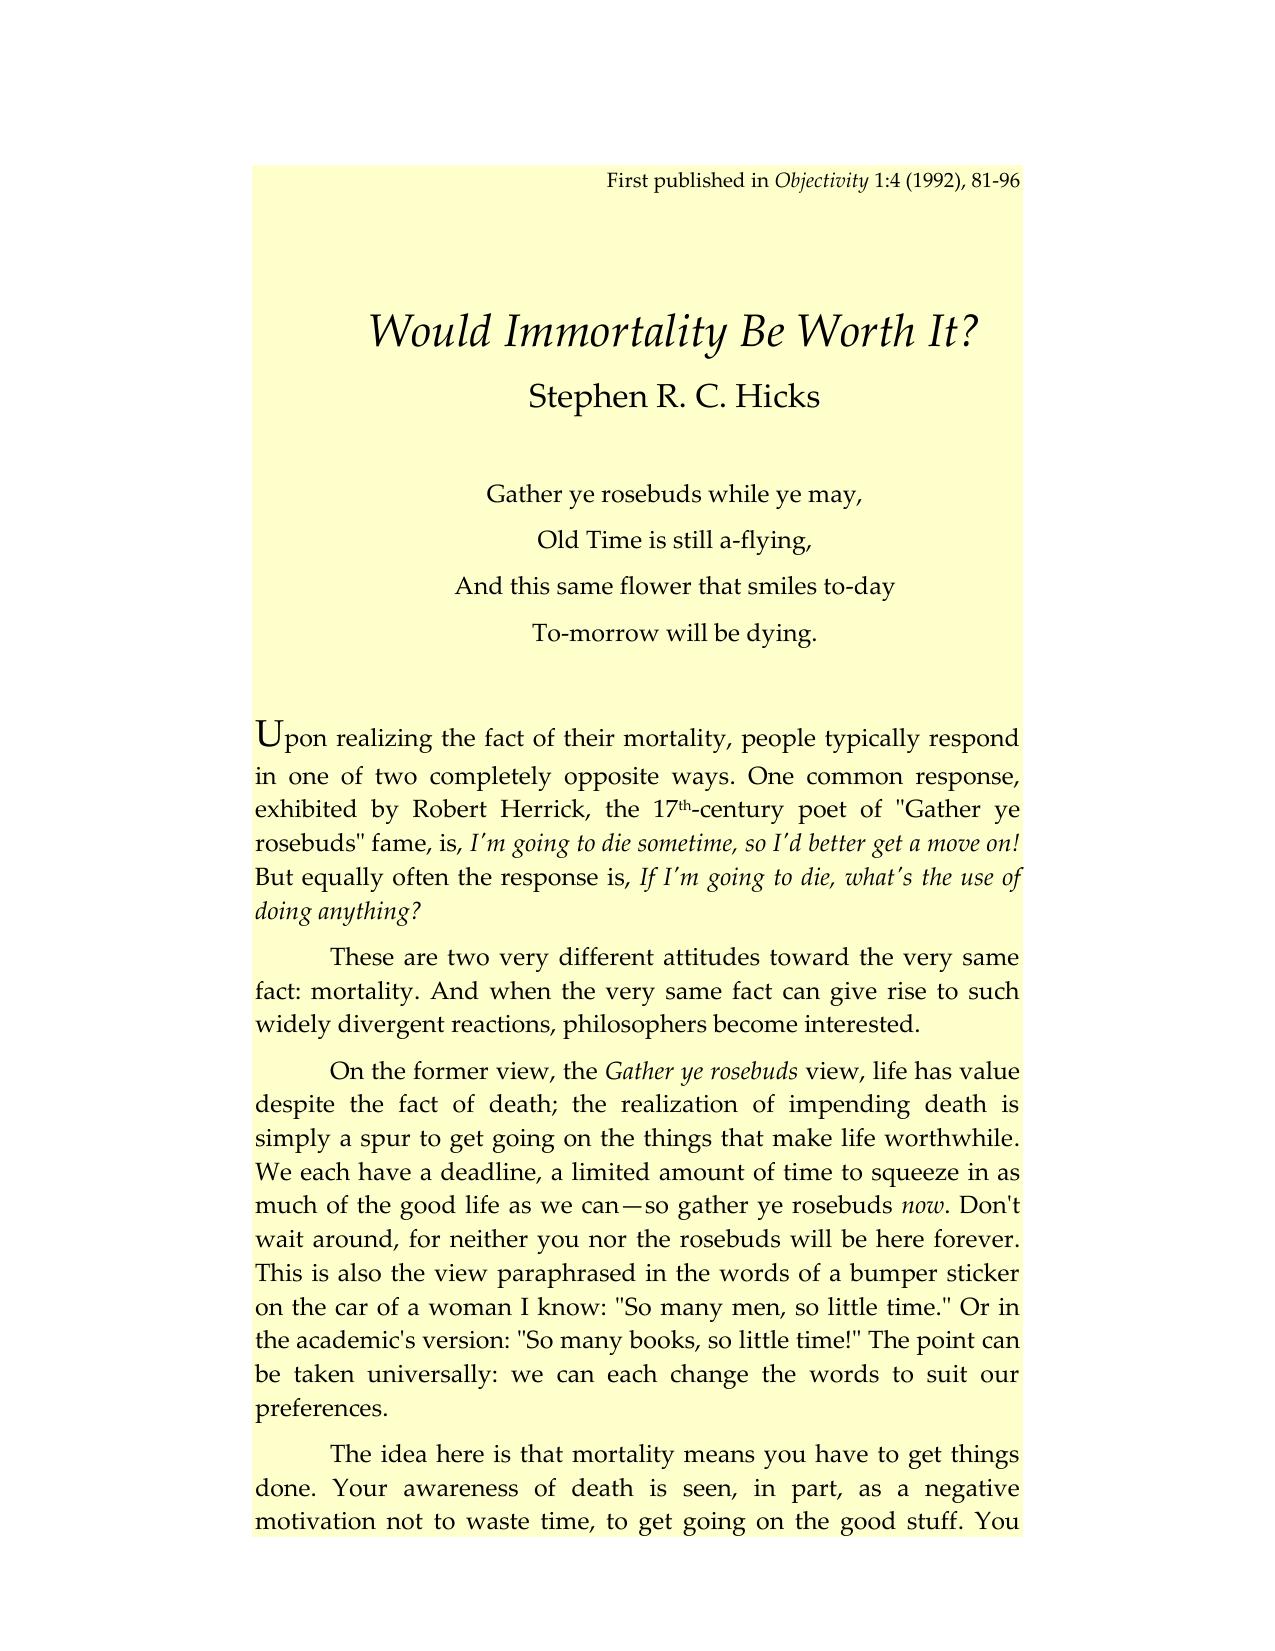 Would Immortality Be Worth It?